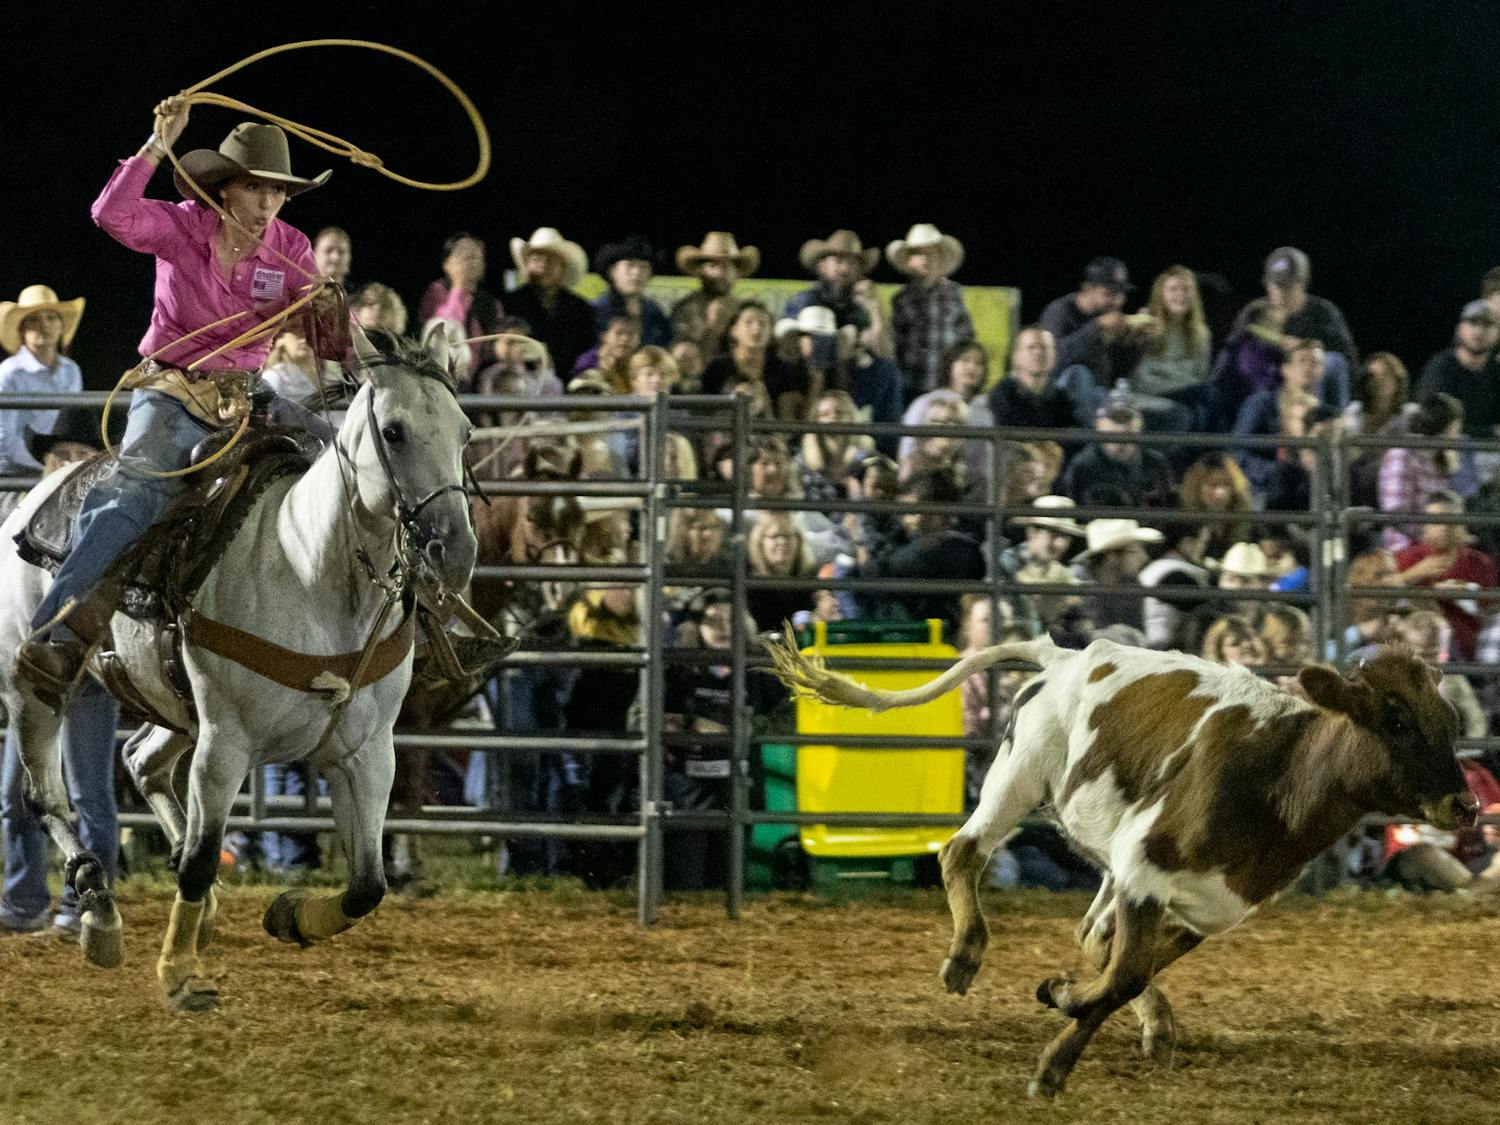 Montana Lynn Bass, 17, competes in breakaway roping at the Efland Ruritan Club Rodeo on Friday, Oct. 7, 2022.